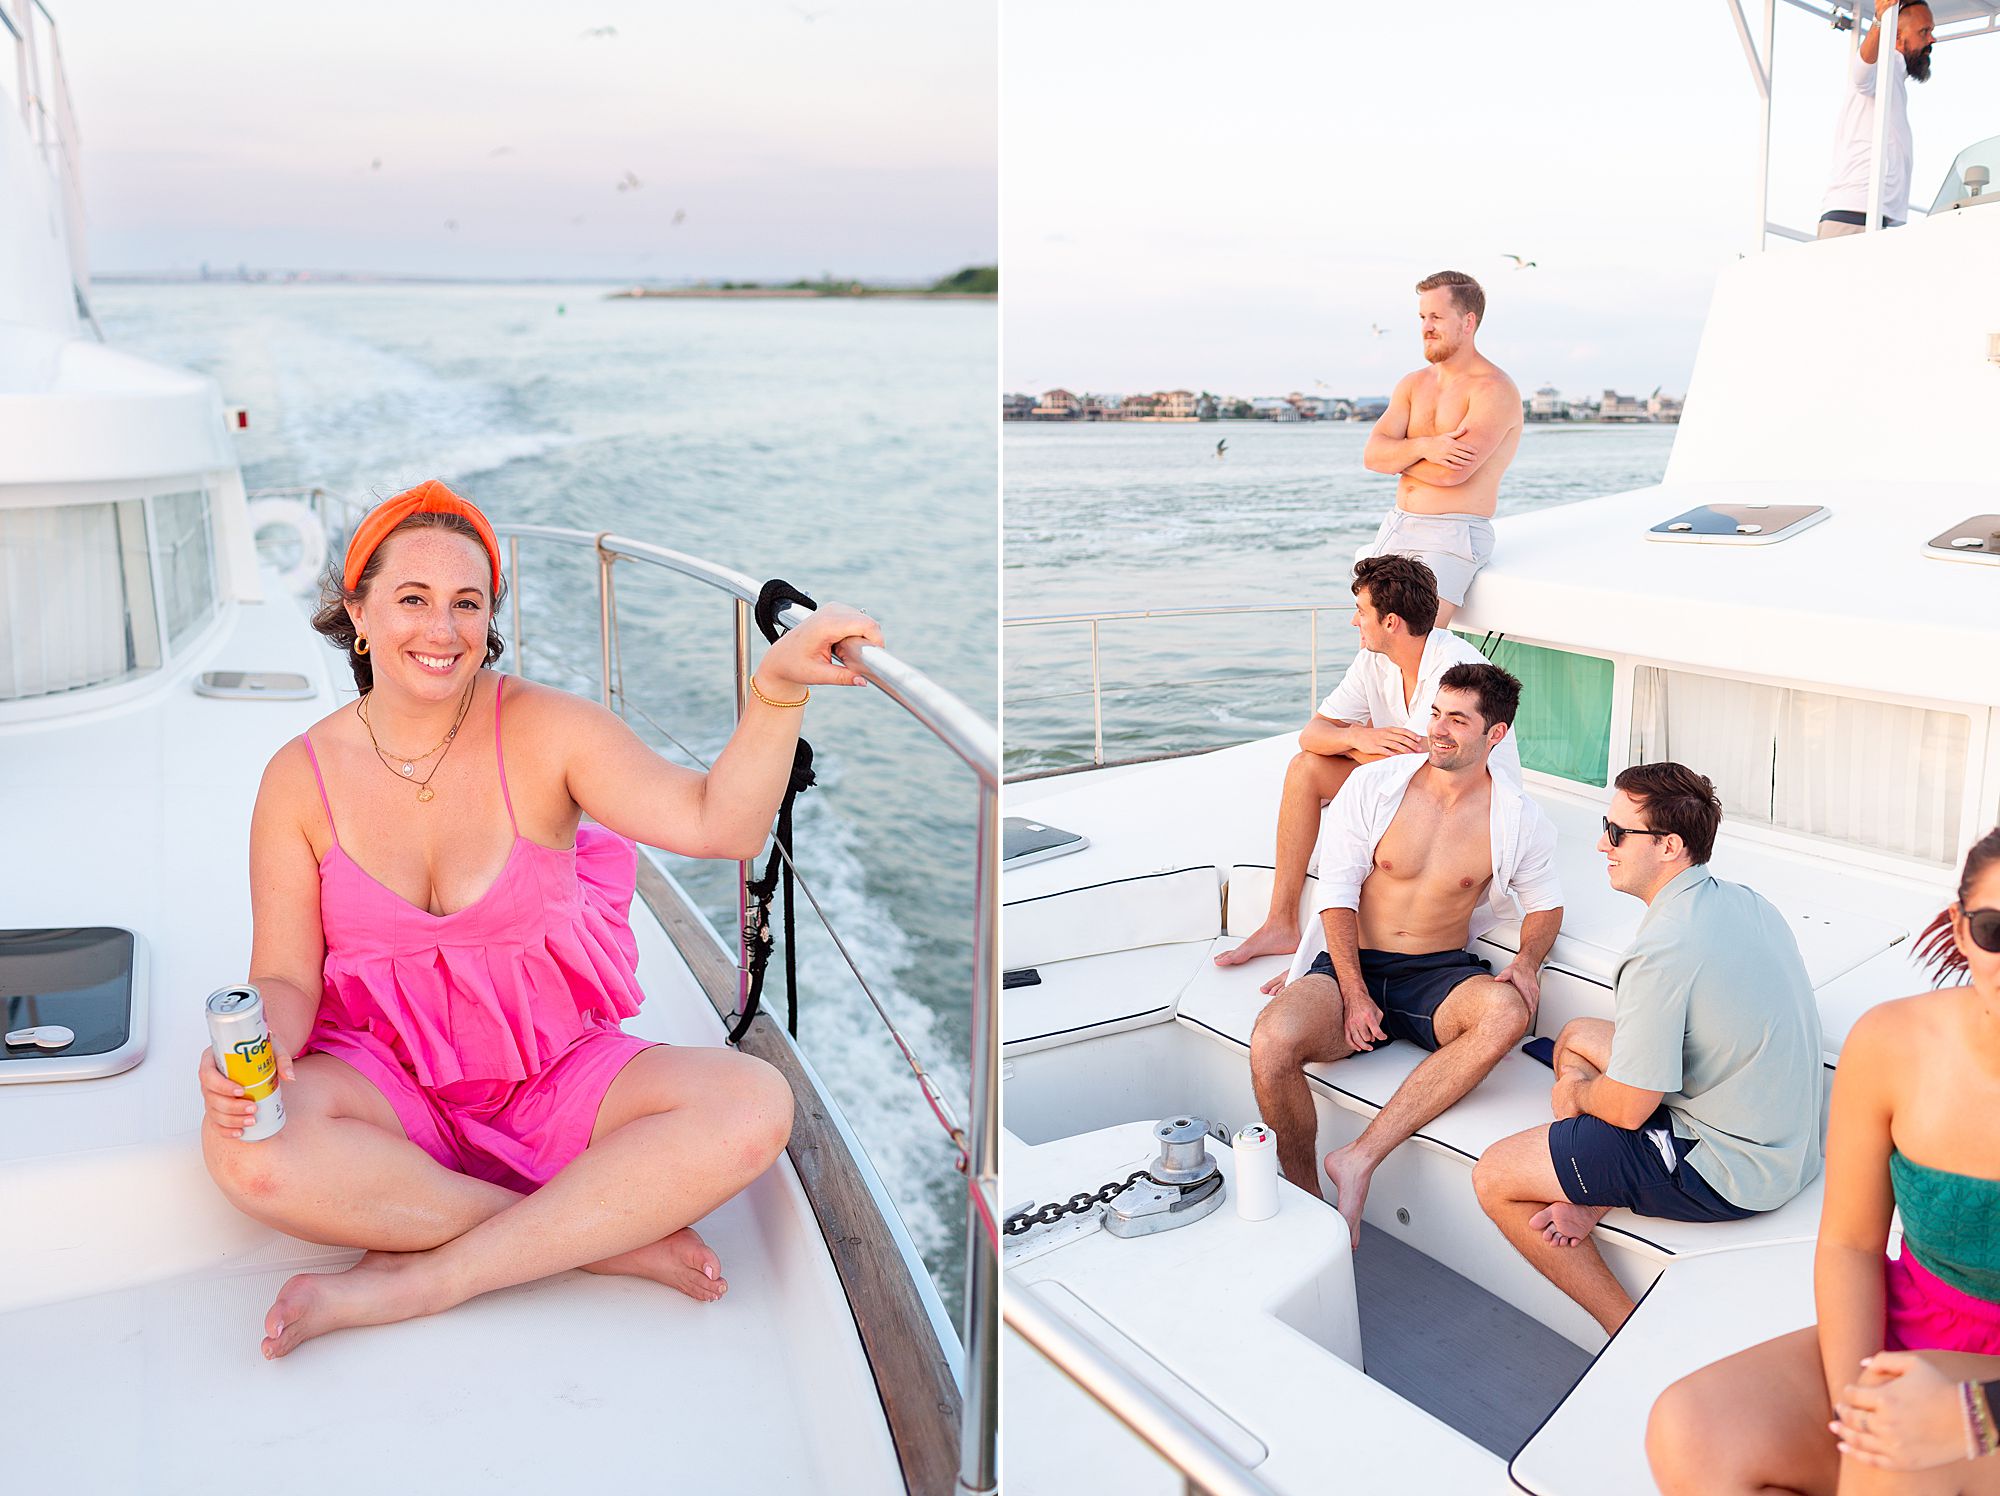 Brooke from Aesthetically Galveston sitting on the lower deck of a catamaran.